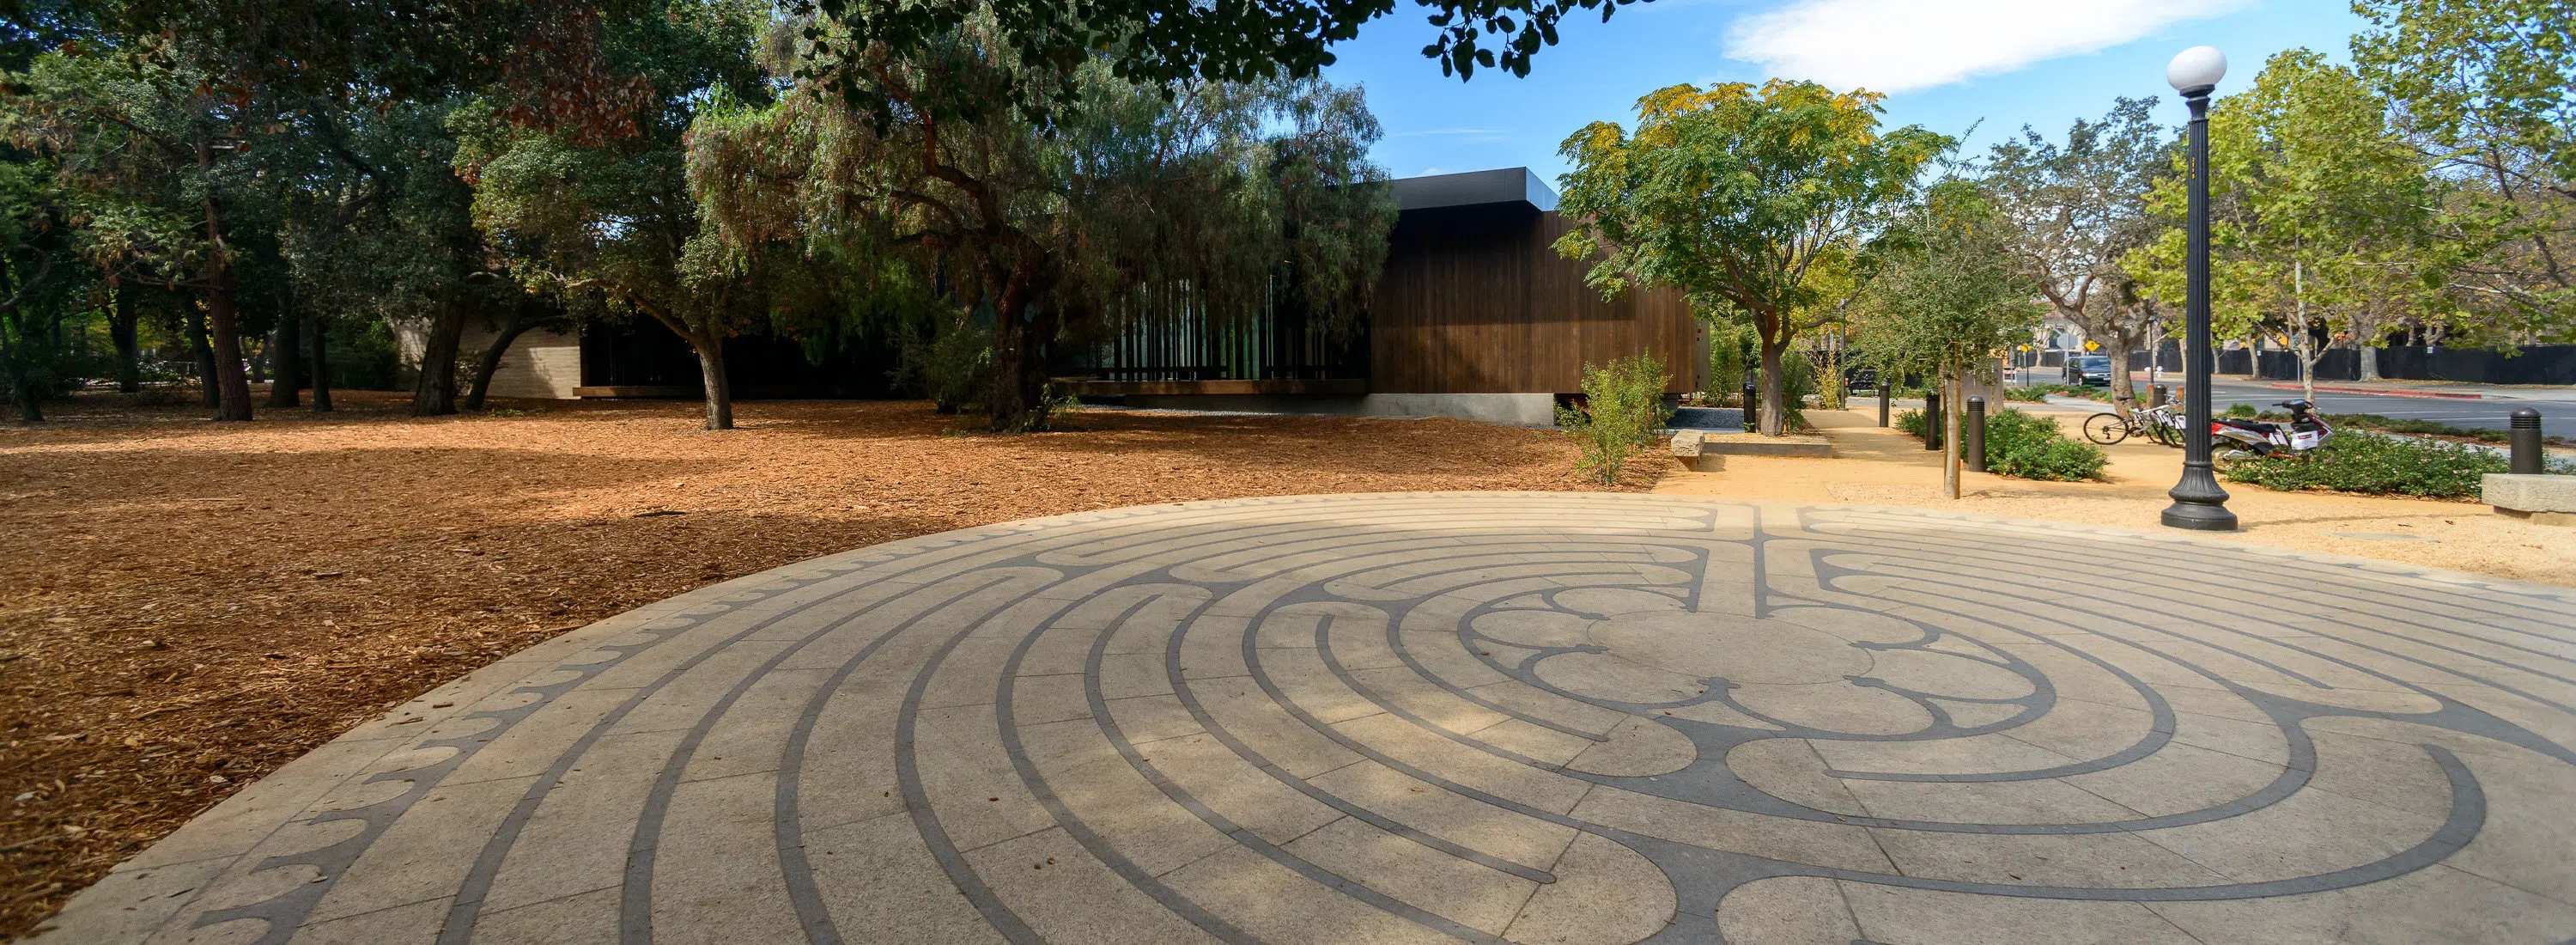 Outdoor walking labyrinth in front of a peaceful facility surrounded by trees.